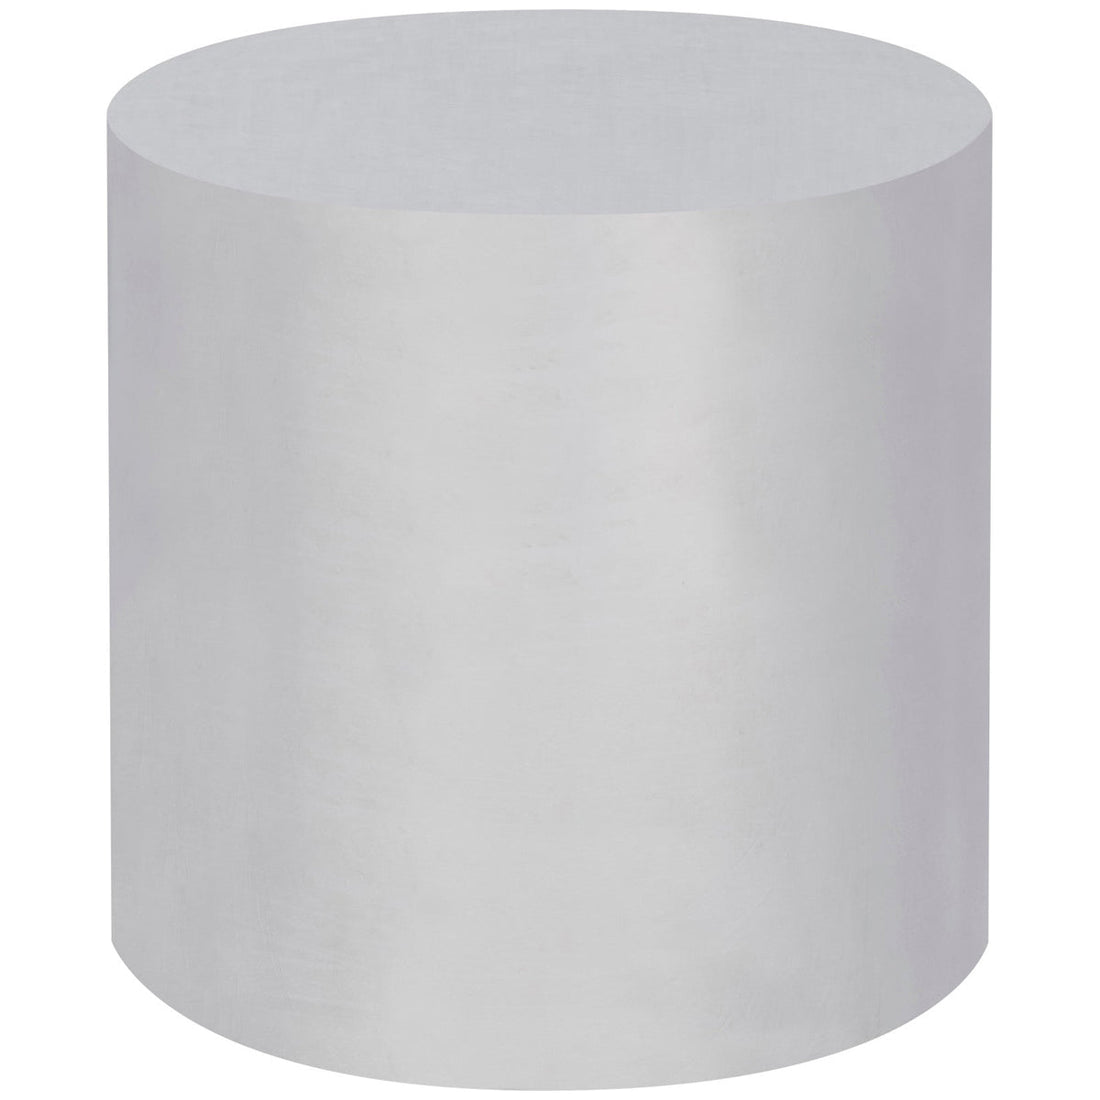 Kelly Hoppen Morgan Round Accent Table - Stainless Steel